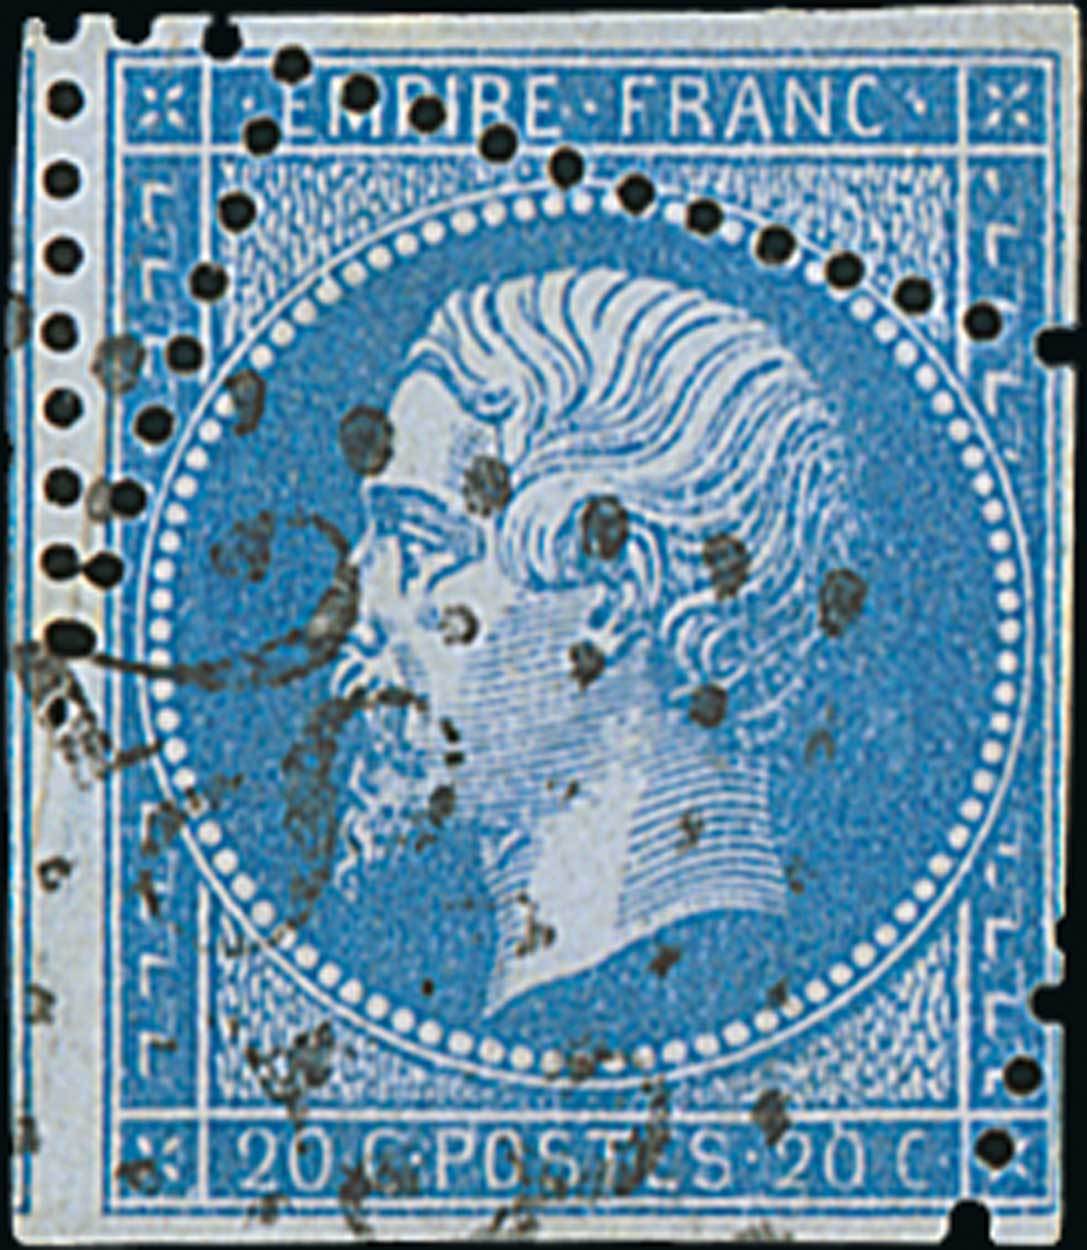 France 1862 Perforated "Empire" Issue 20c. blue, misplaced perforation obliquely,